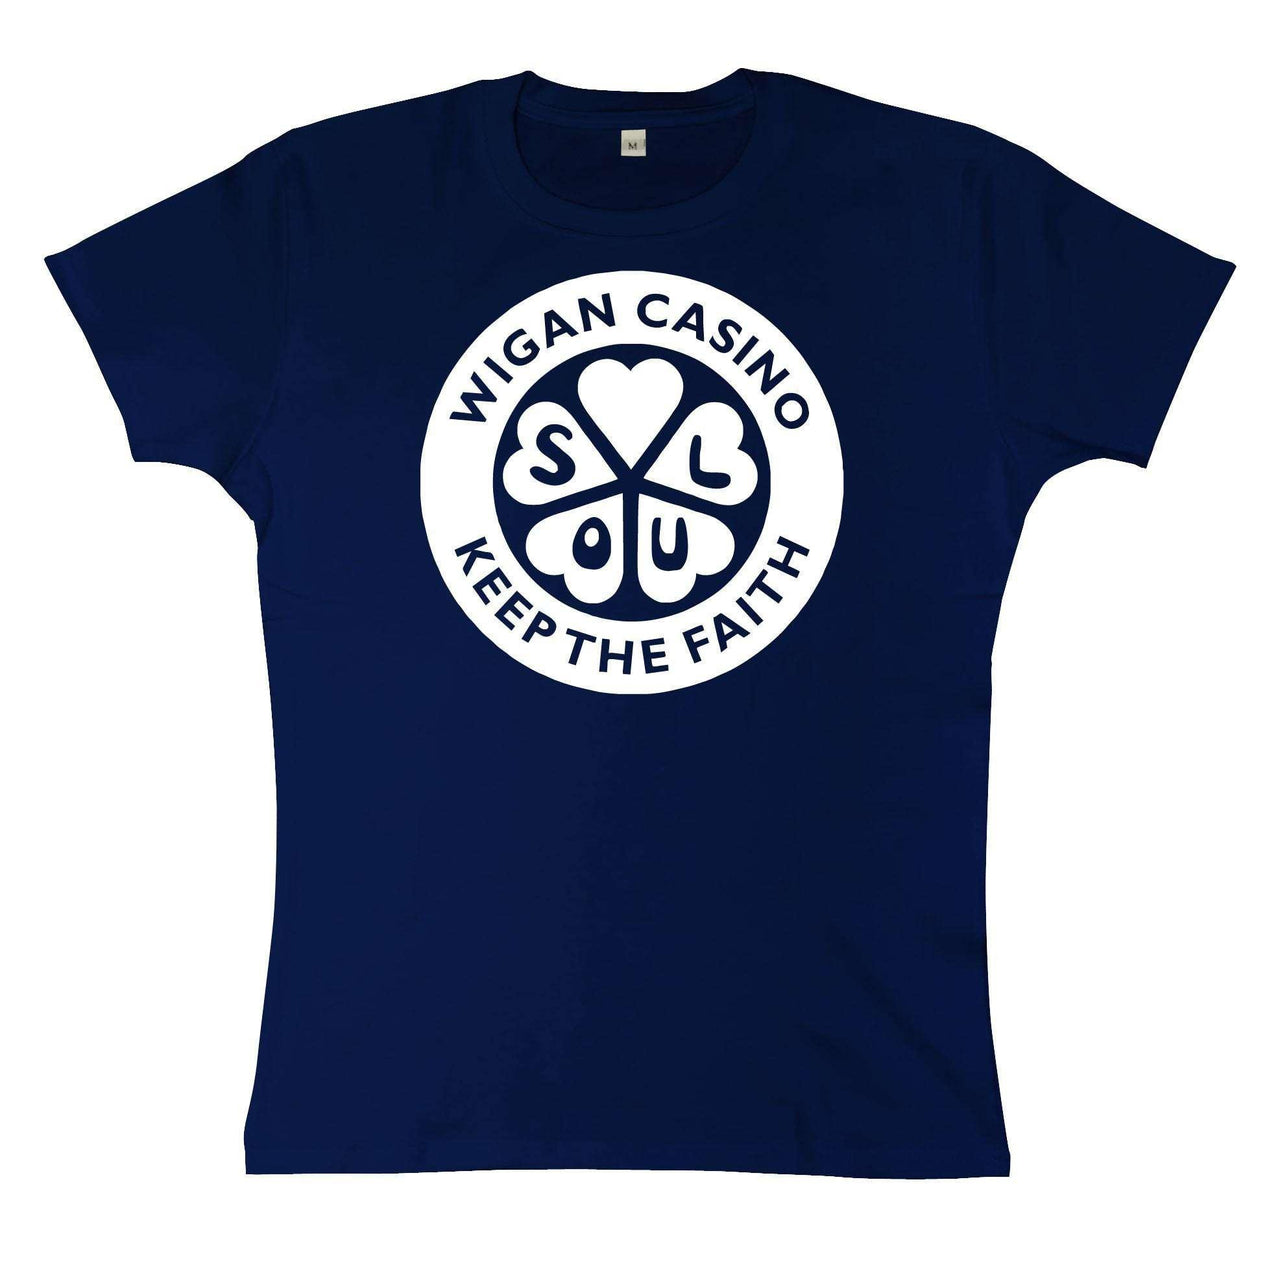 Wigan Casino Keep The Faith Womens Fitted T-Shirt 8Ball